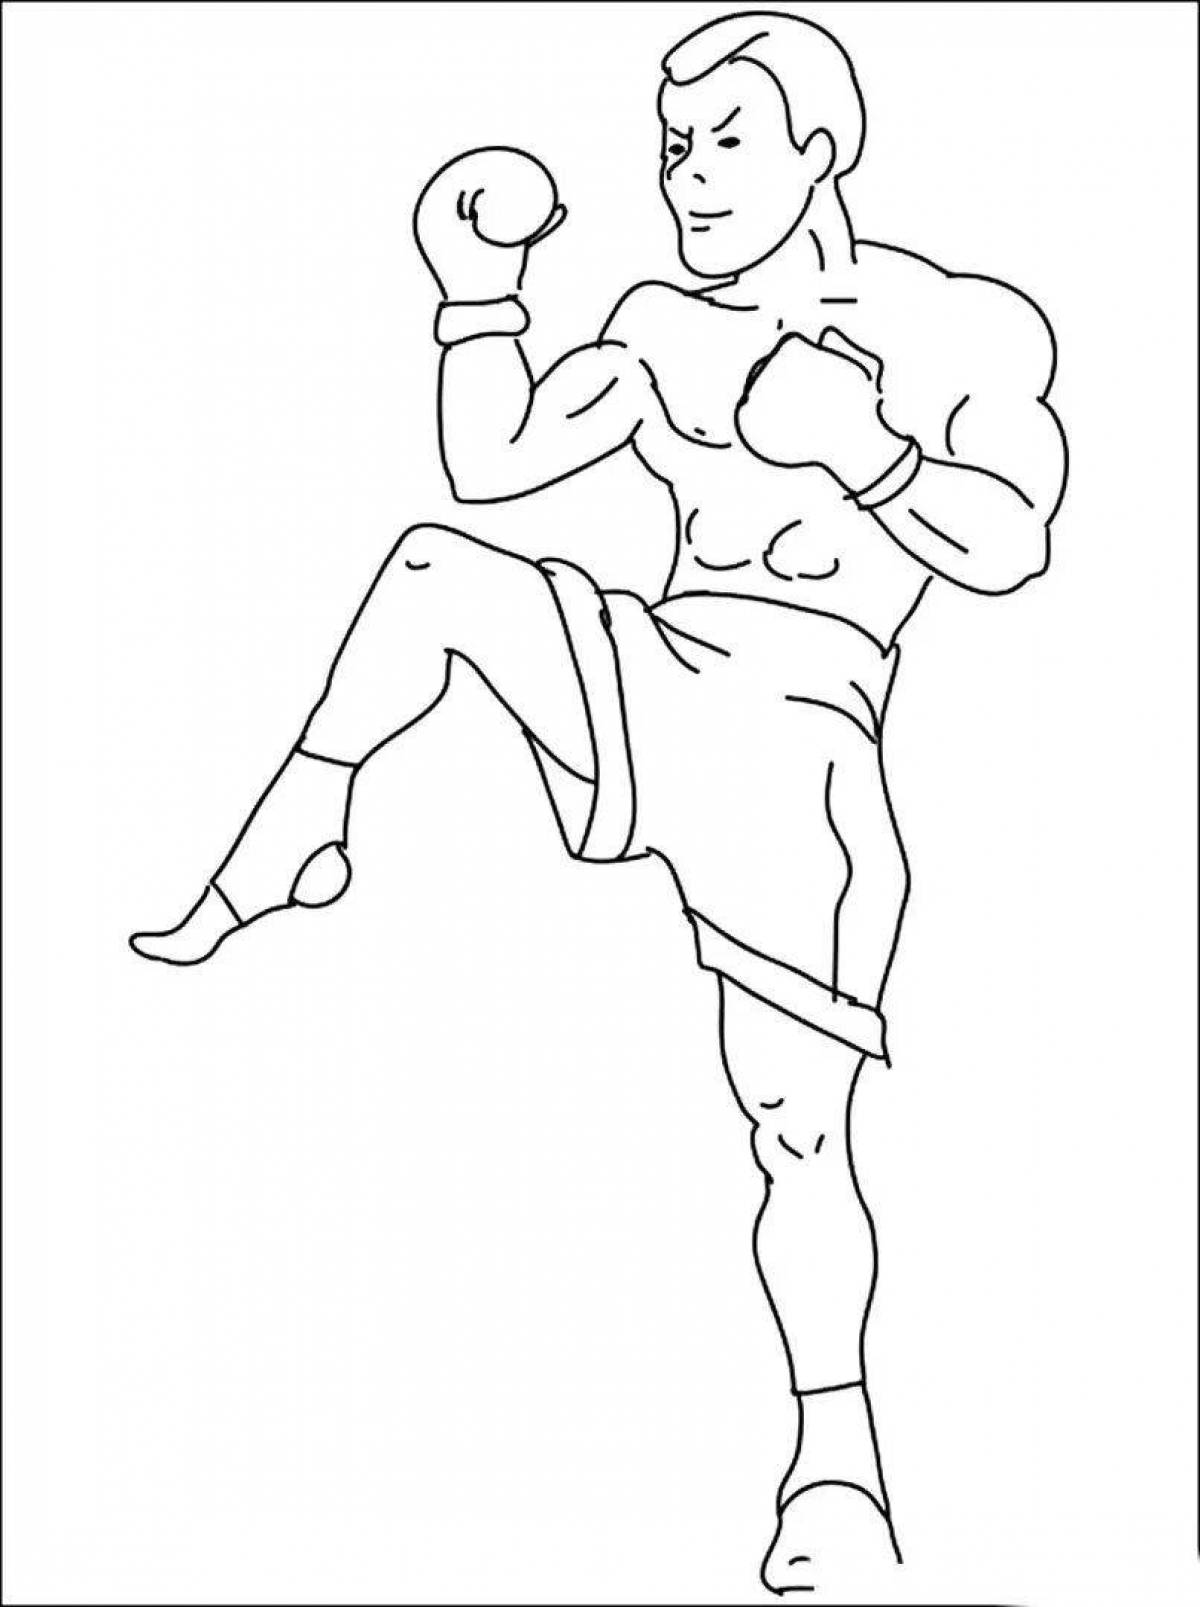 Adorable boxing coloring page for kids